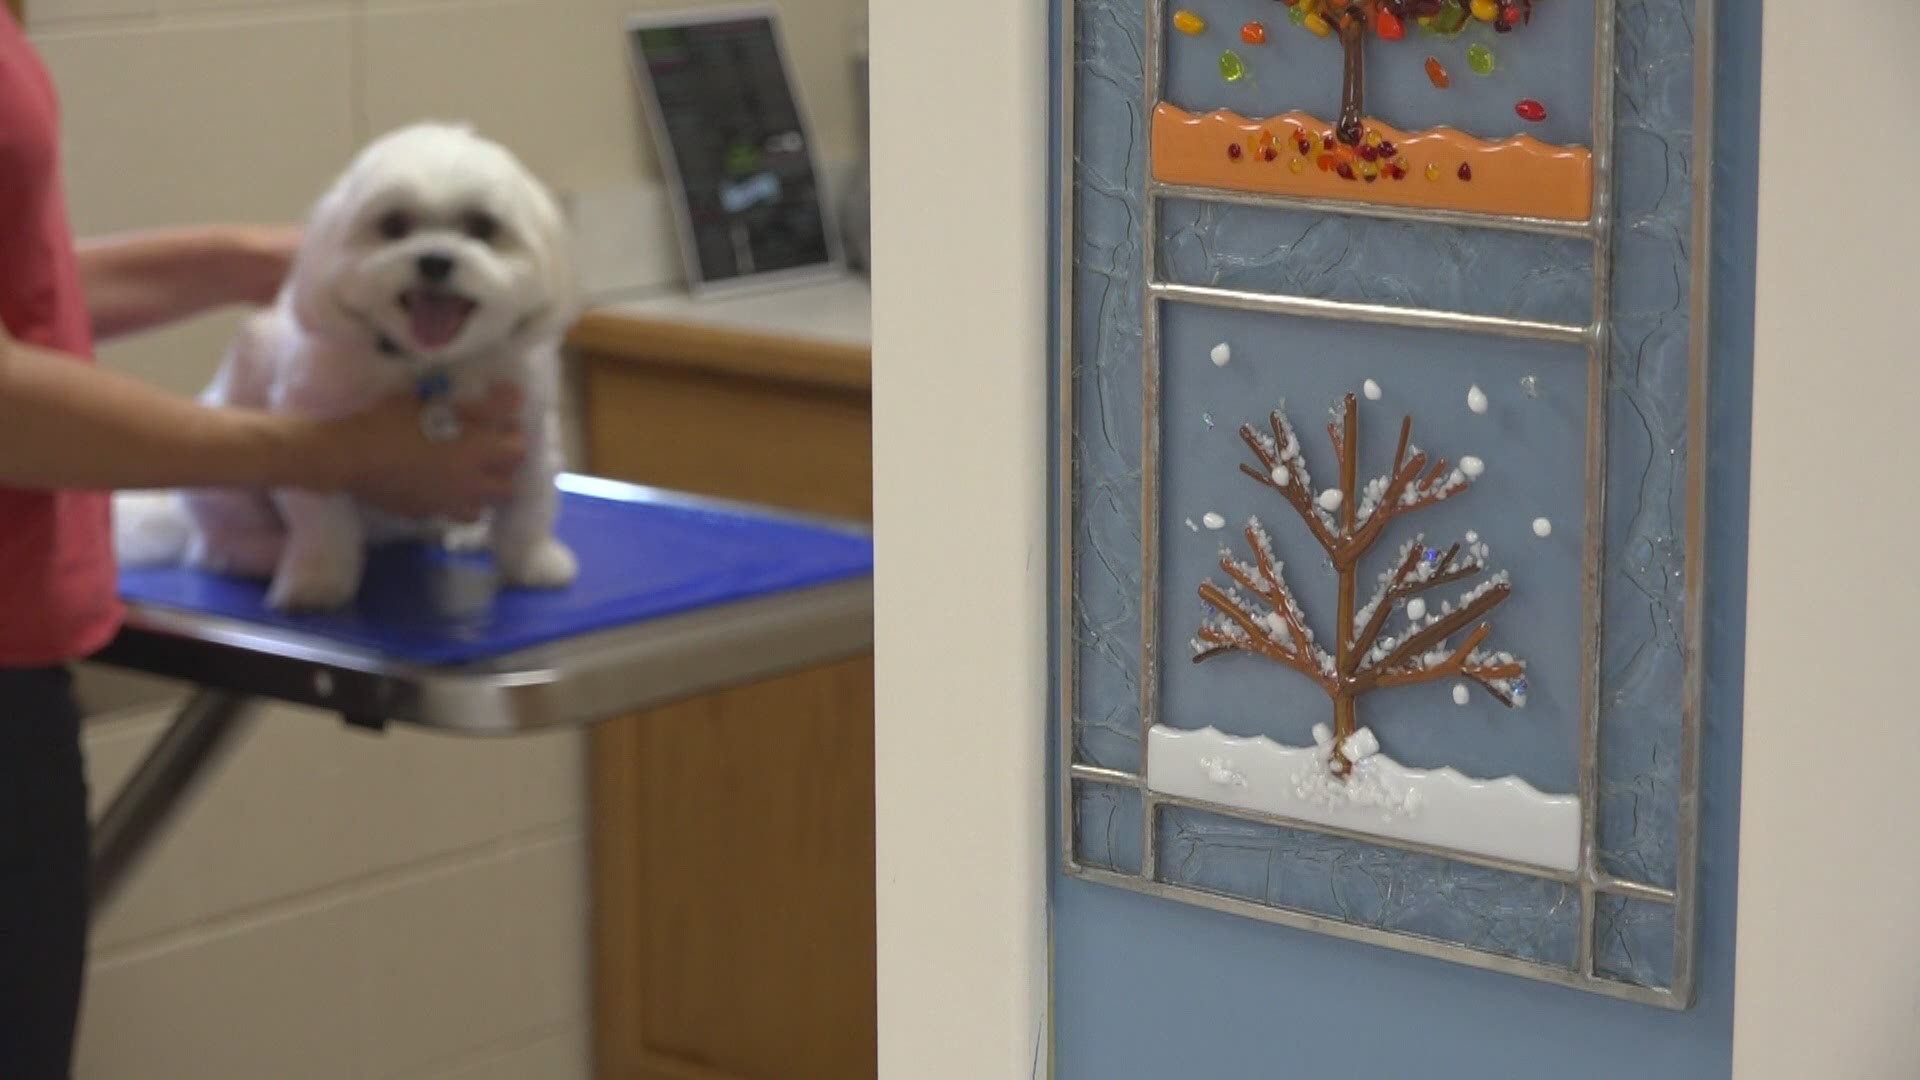 Because of the increase in "pandemic puppies" and "COVID kittens," pet parents may have to wait weeks or months for an appointment at their primary care vet.